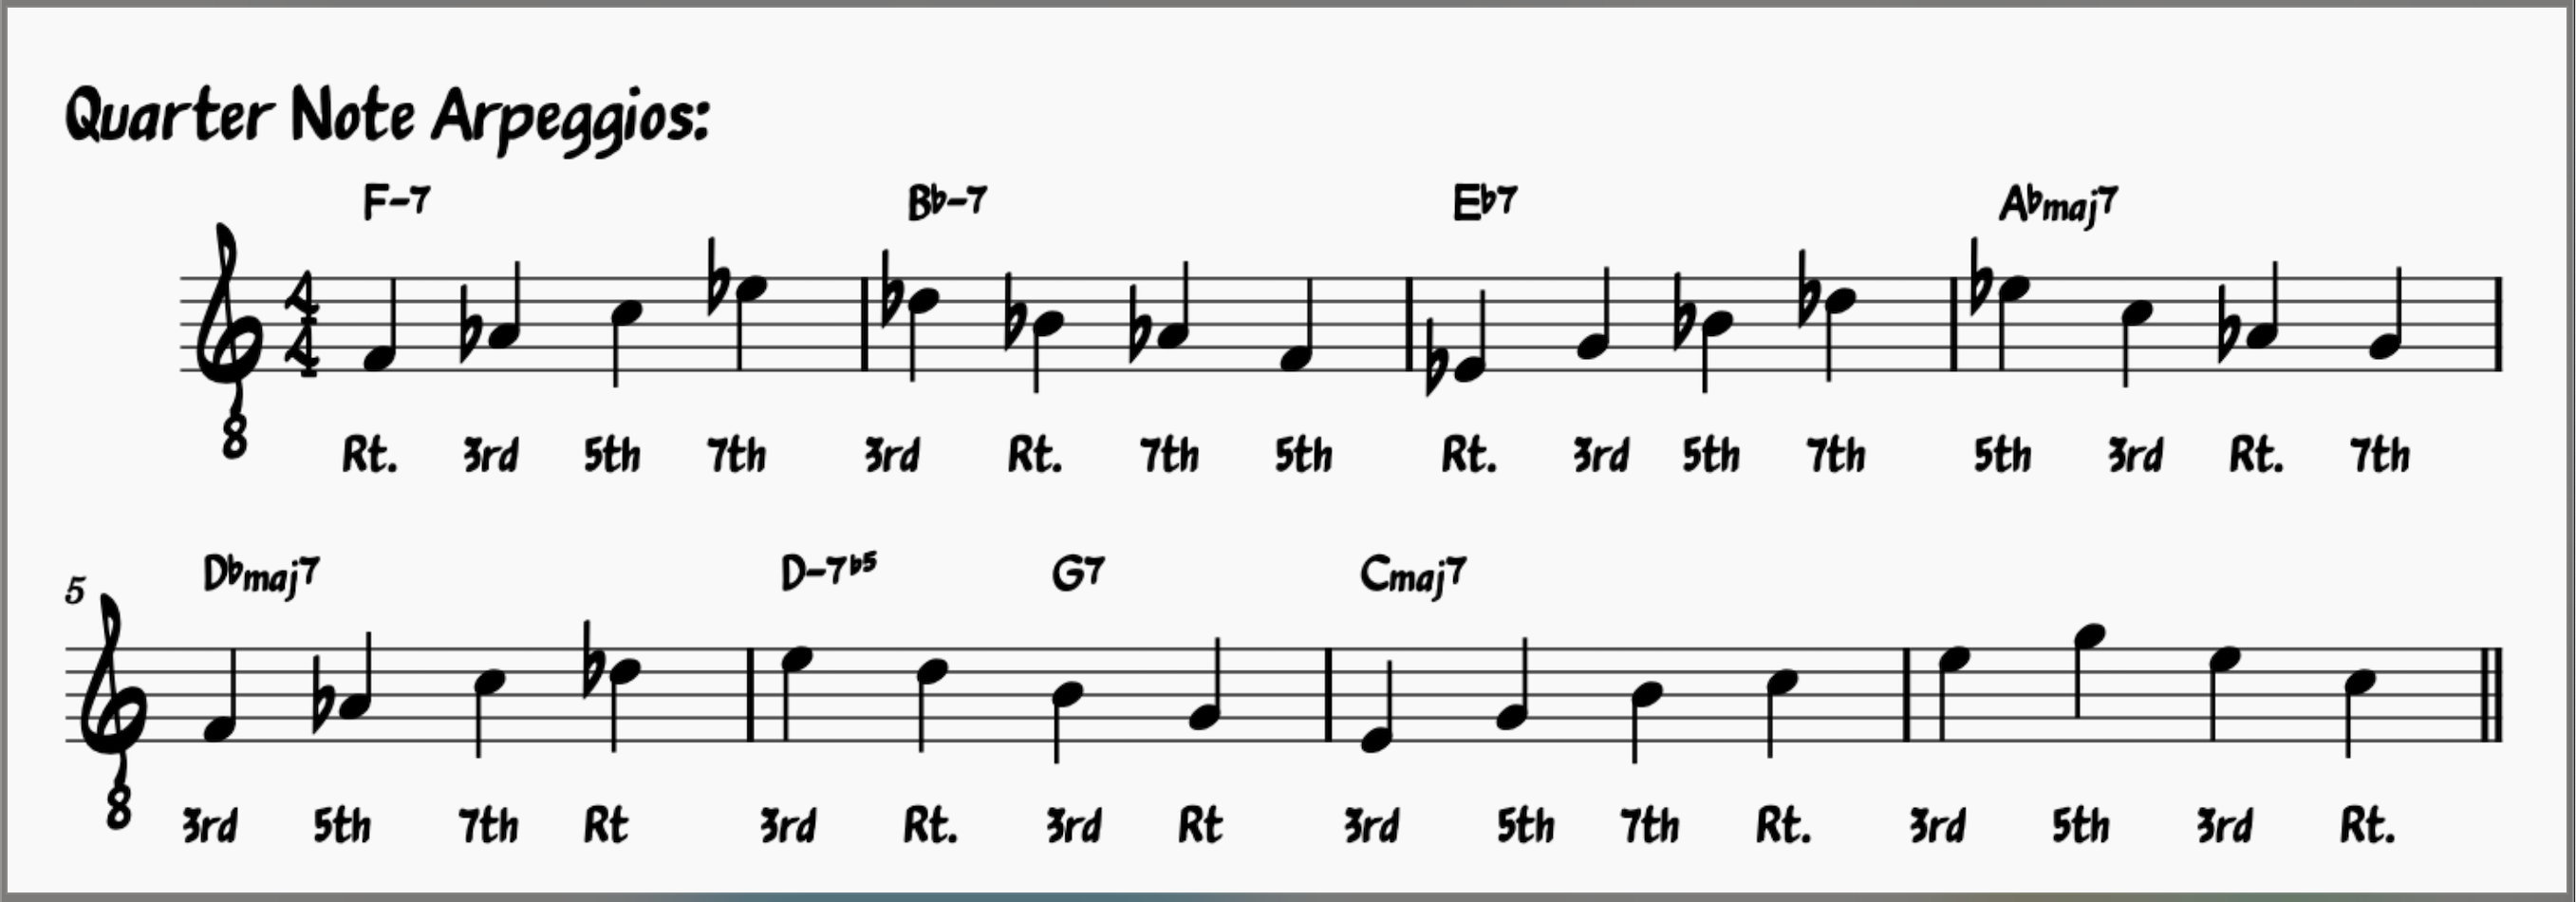 Chord Tone Exercise for All The Things You Are Targeting the Rt, 3rd, 5th, and 7th